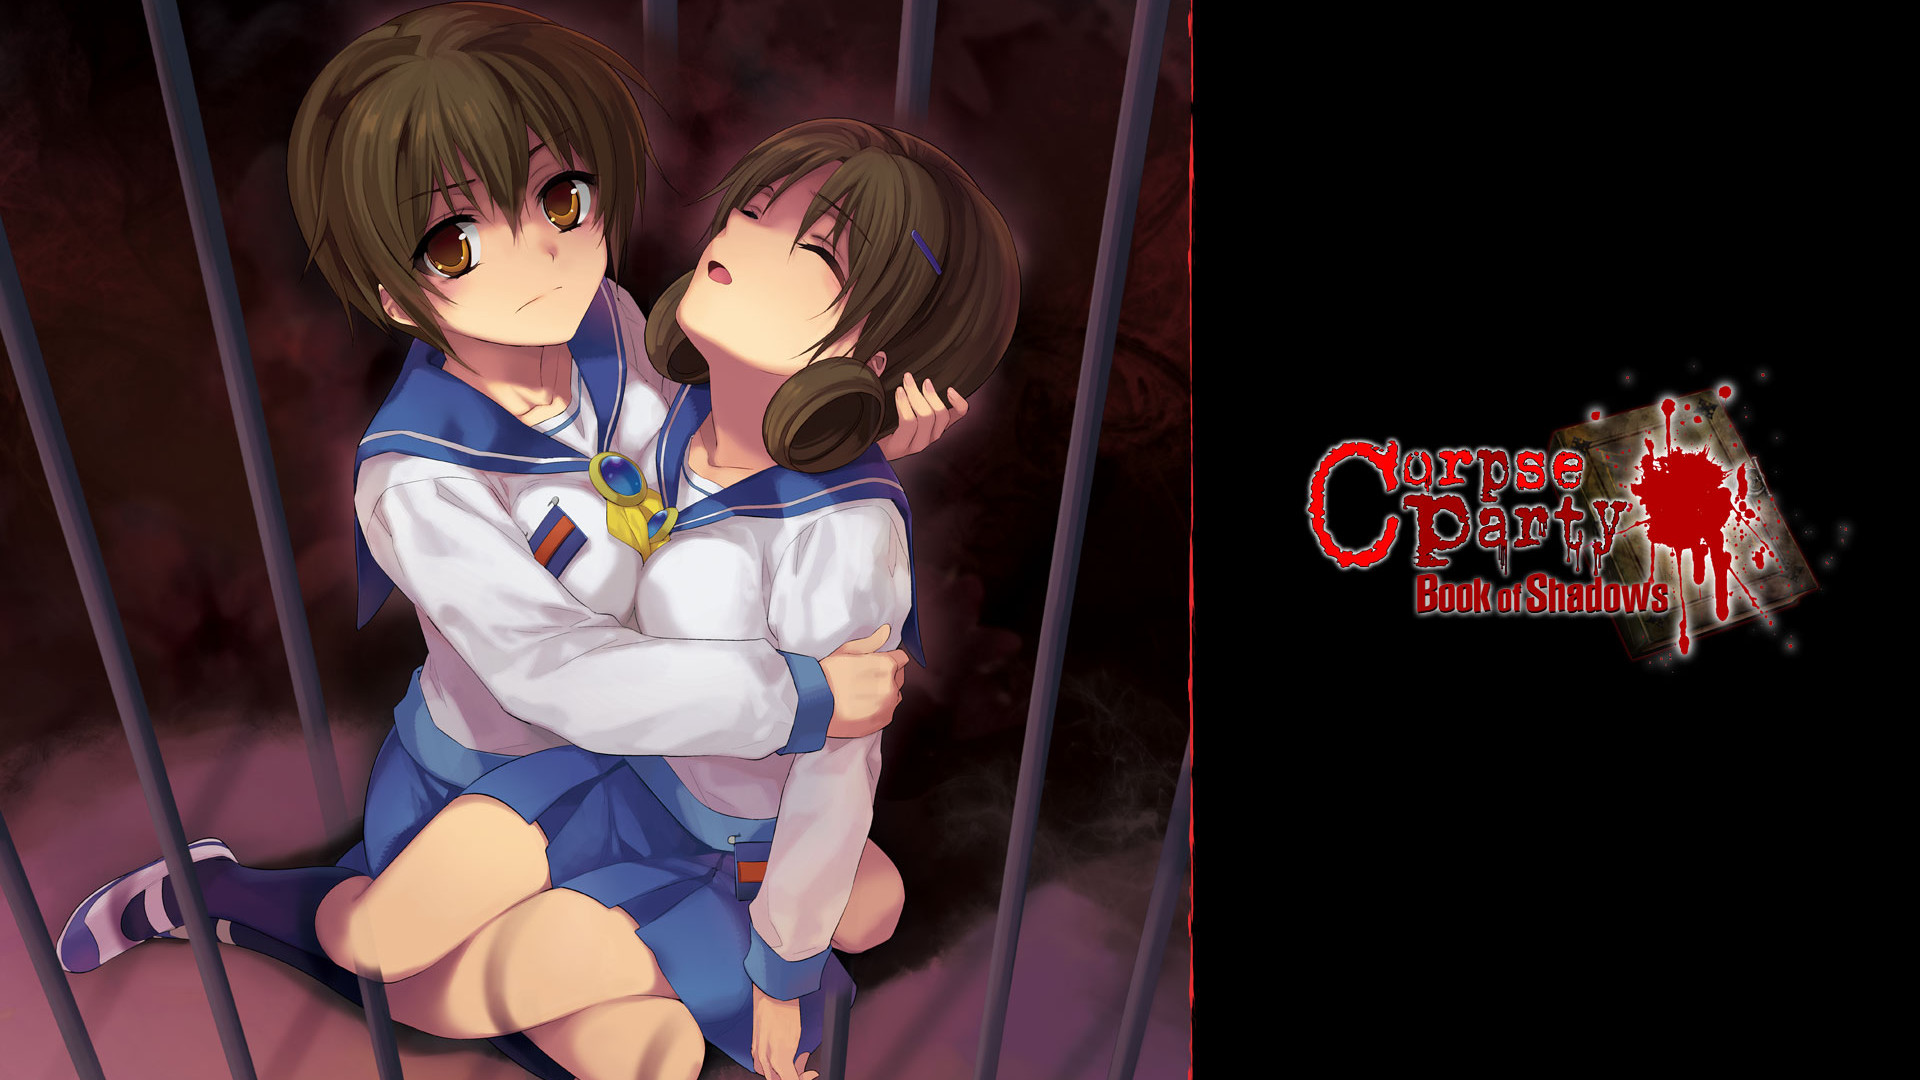 Anime Corpse Party 1920x1080